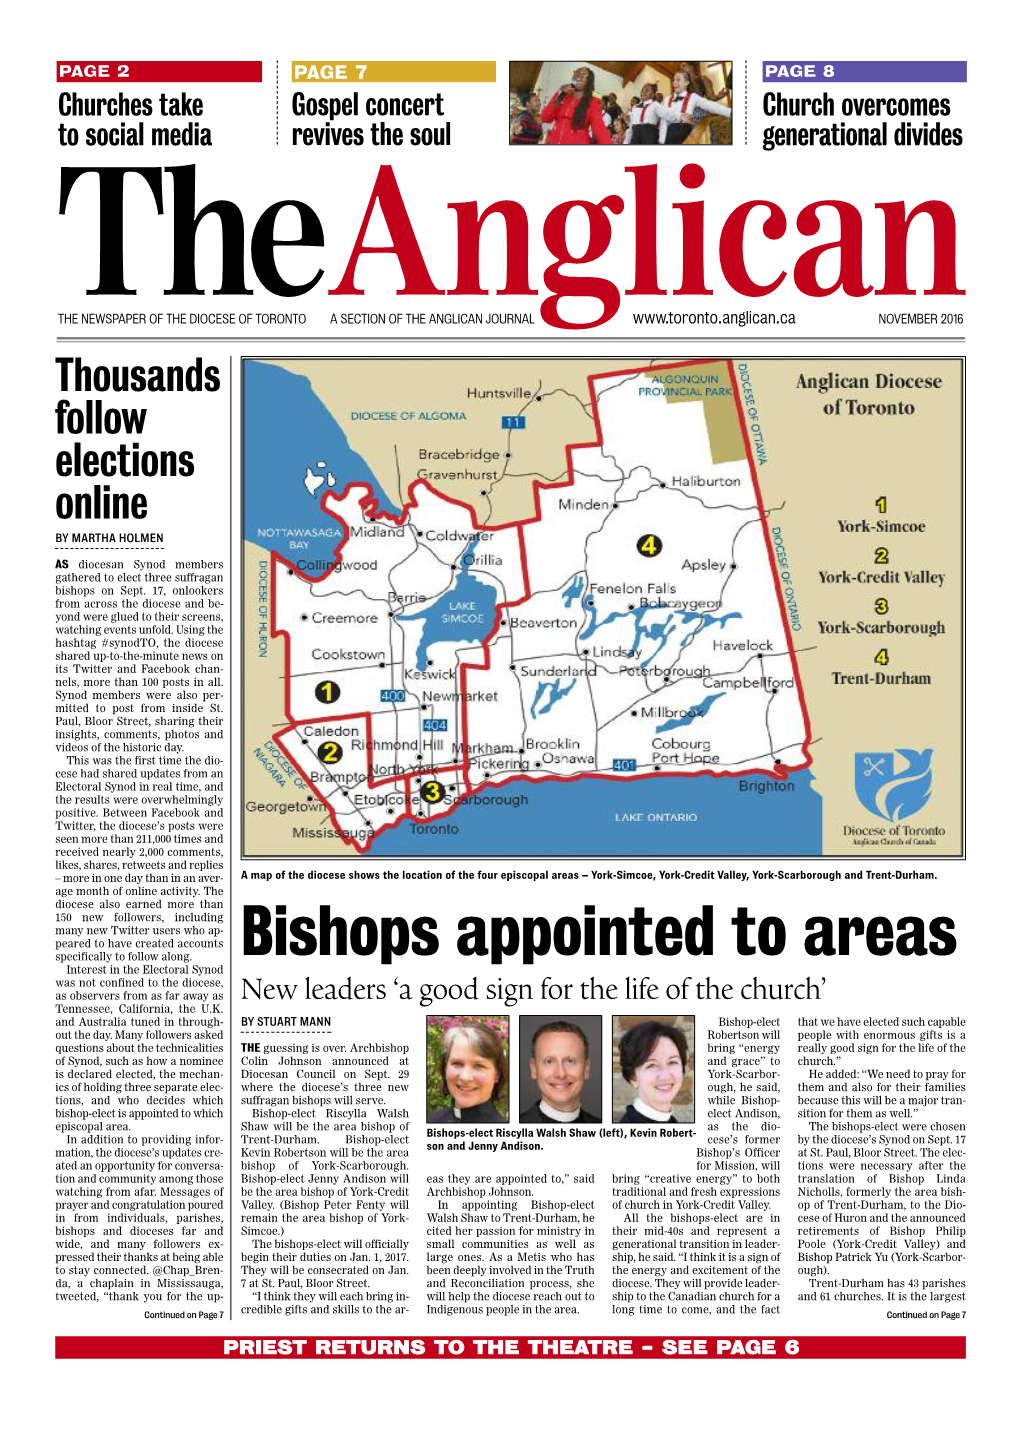 Bishops Appointed to Areas Specifically to Follow Along